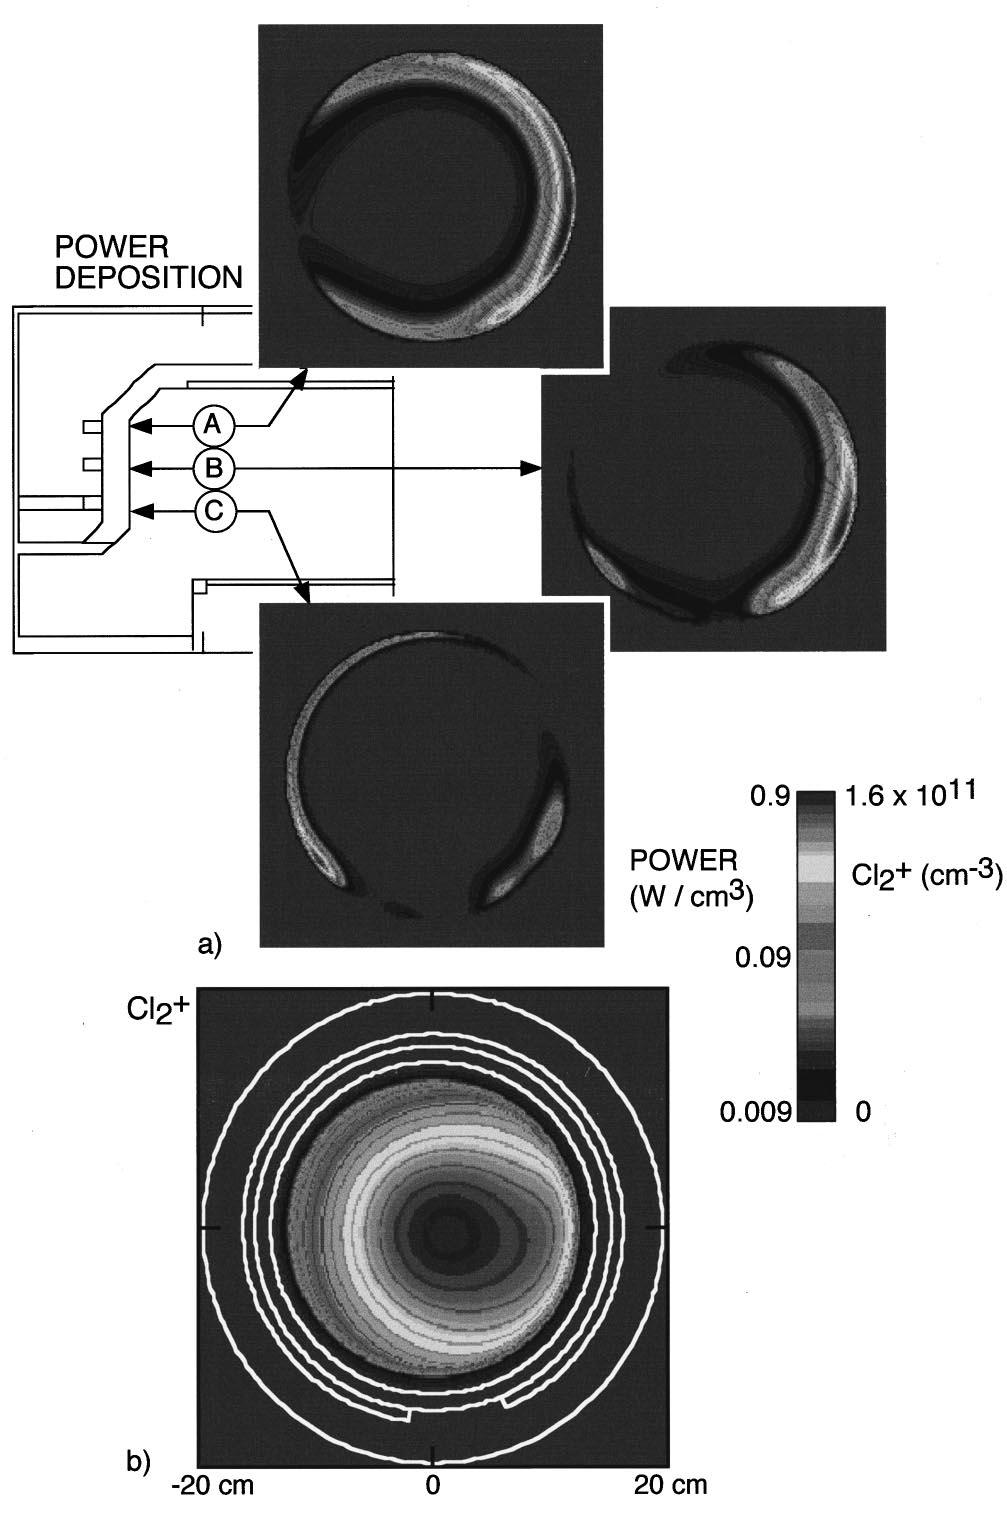 2461 Hwang, Keiter, and Kushner: 3D physical and electromagnetic structures 2461 FIG. 10. Plasma properties of the solenoid ICP reactor 10 mtorr Cl 2, 400 W.